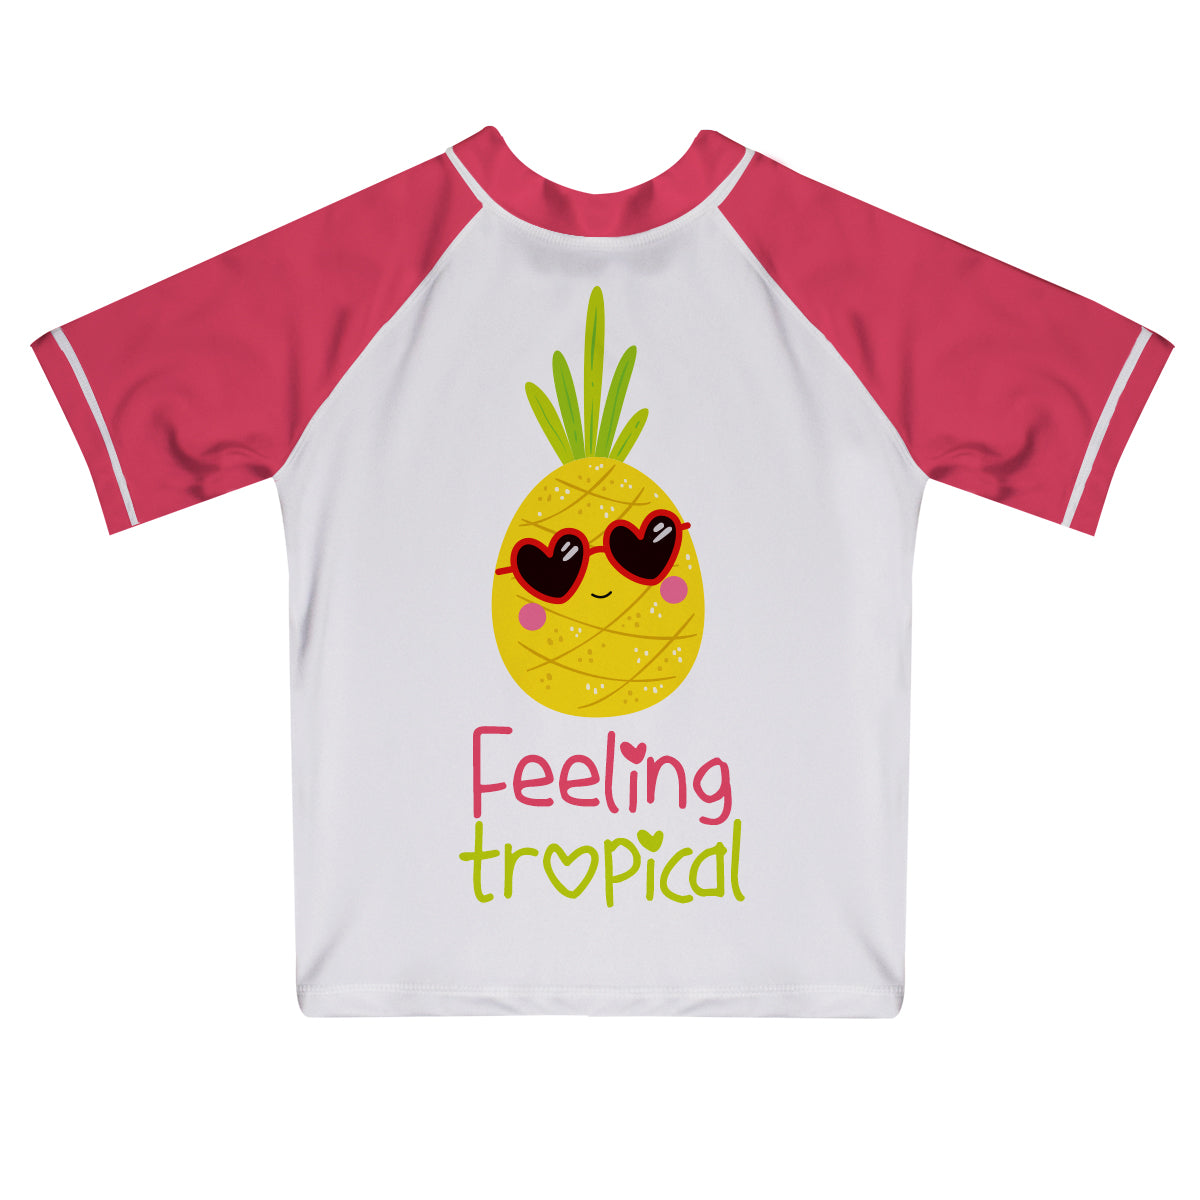 Feeling Tropical White and Pink Short Sleeve Rash Guard - Wimziy&Co.